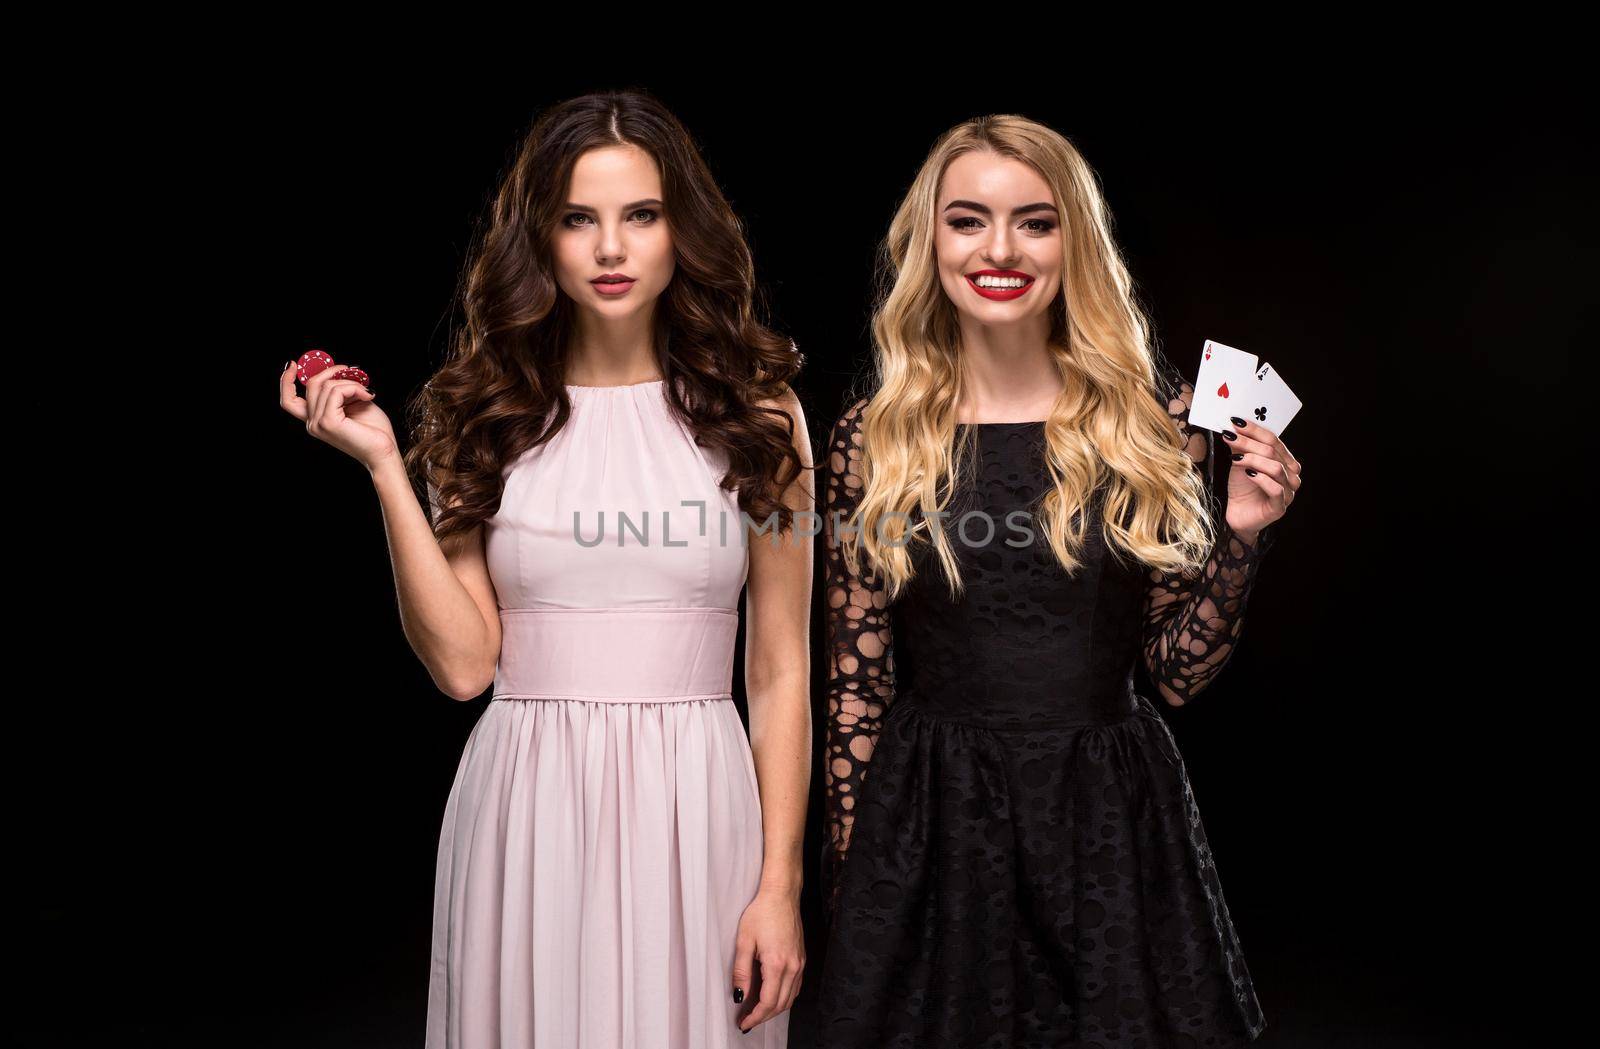 Two Sexy girls brunette and blonde, posing with chips in her hands, poker concept black background by nazarovsergey